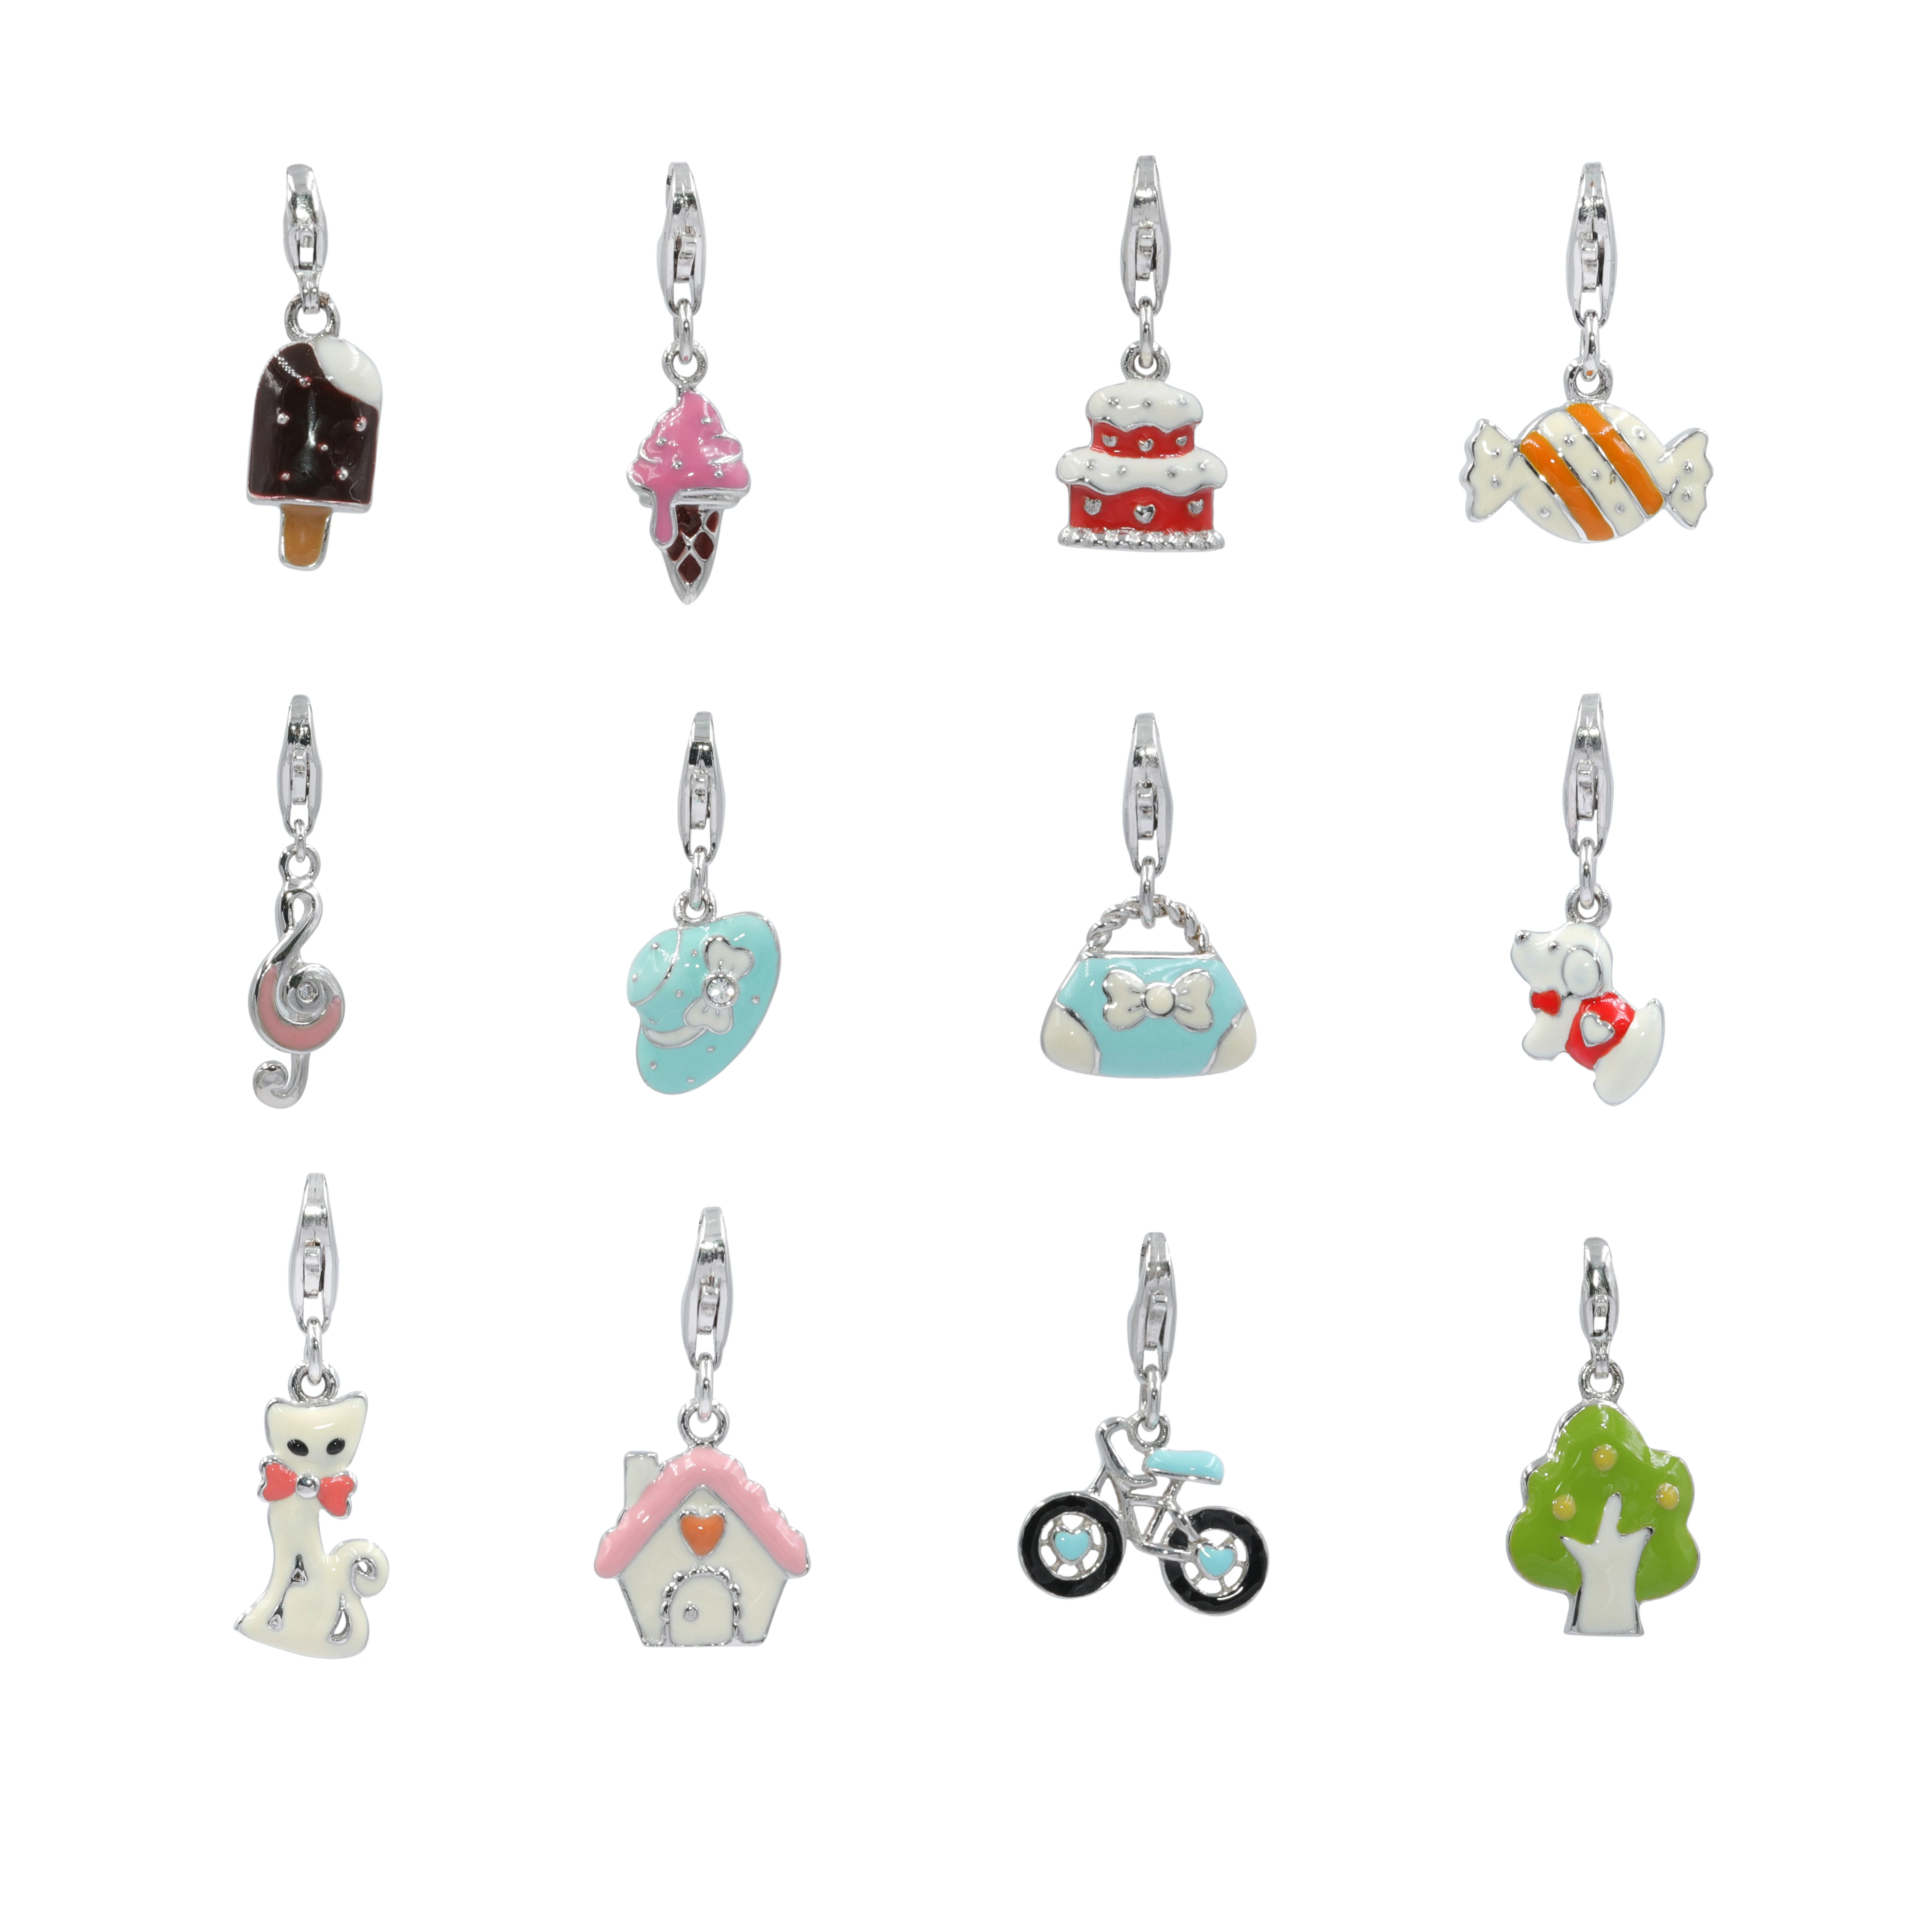 16-20 Mireval Sterling Silver Enameled Lollipop Charm on a Sterling Silver Chain Necklace 